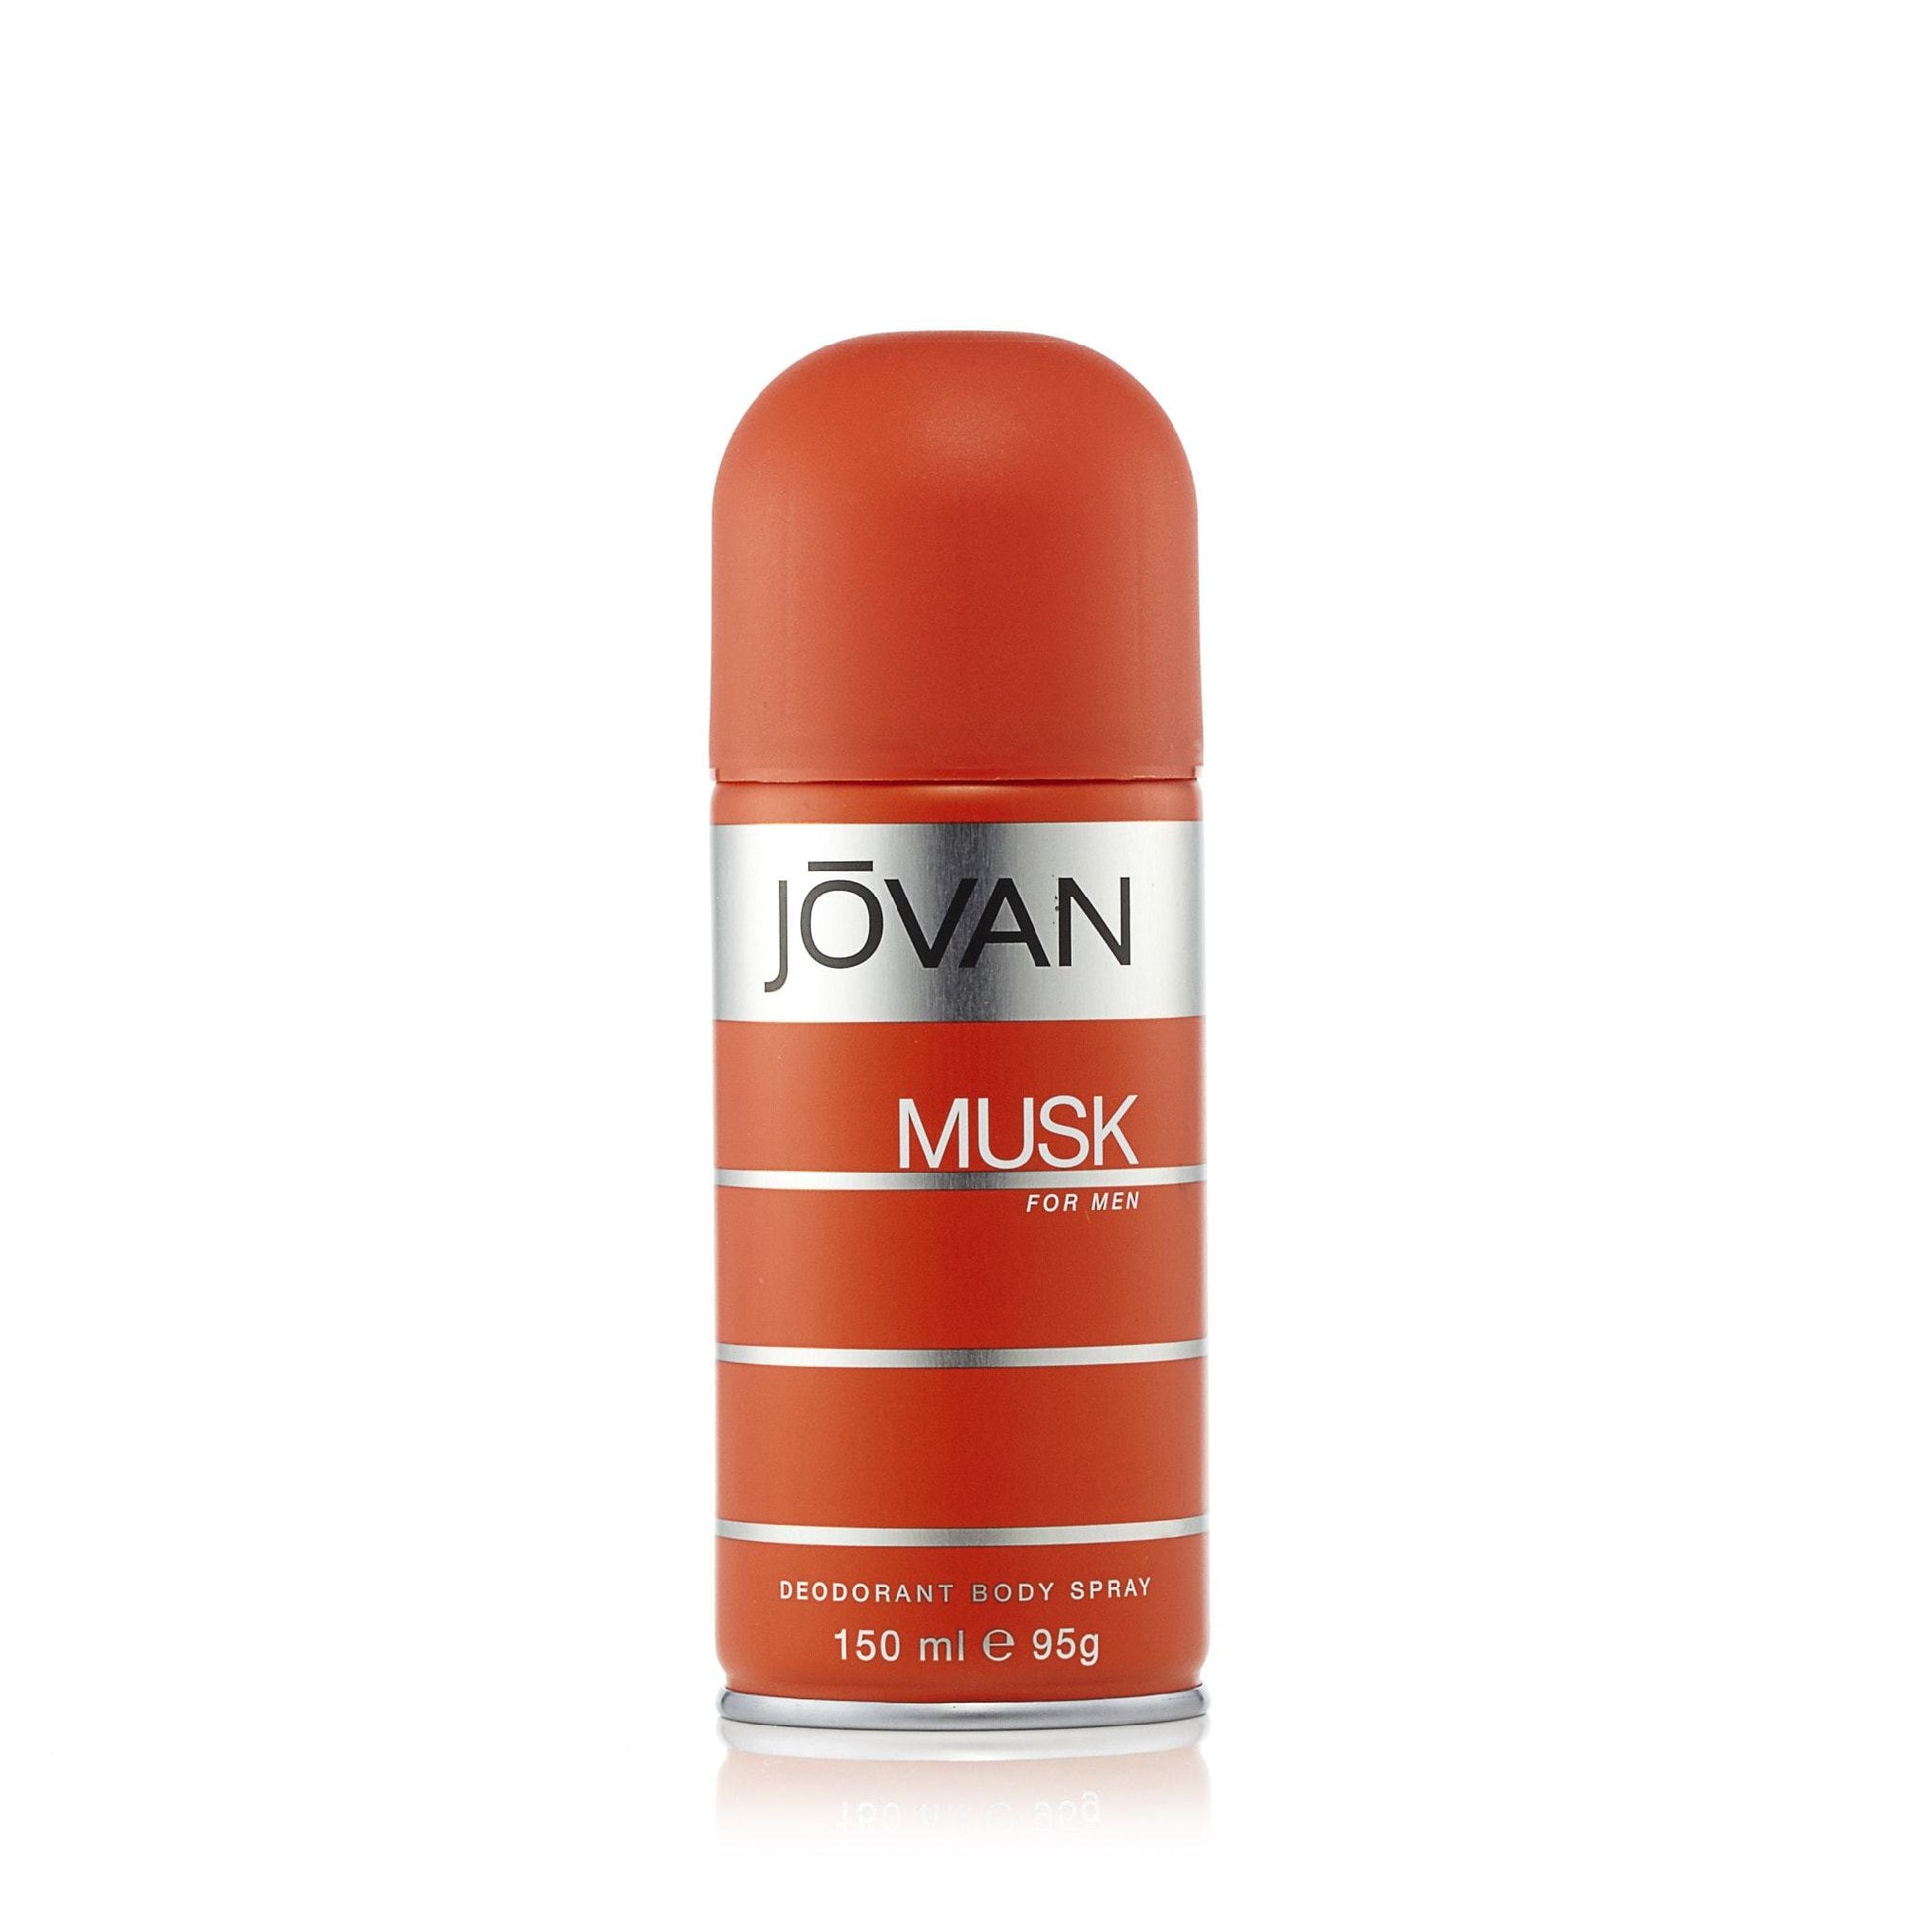 Jovan Musk Deodorant Body Spray for Men by Coty, Product image 1